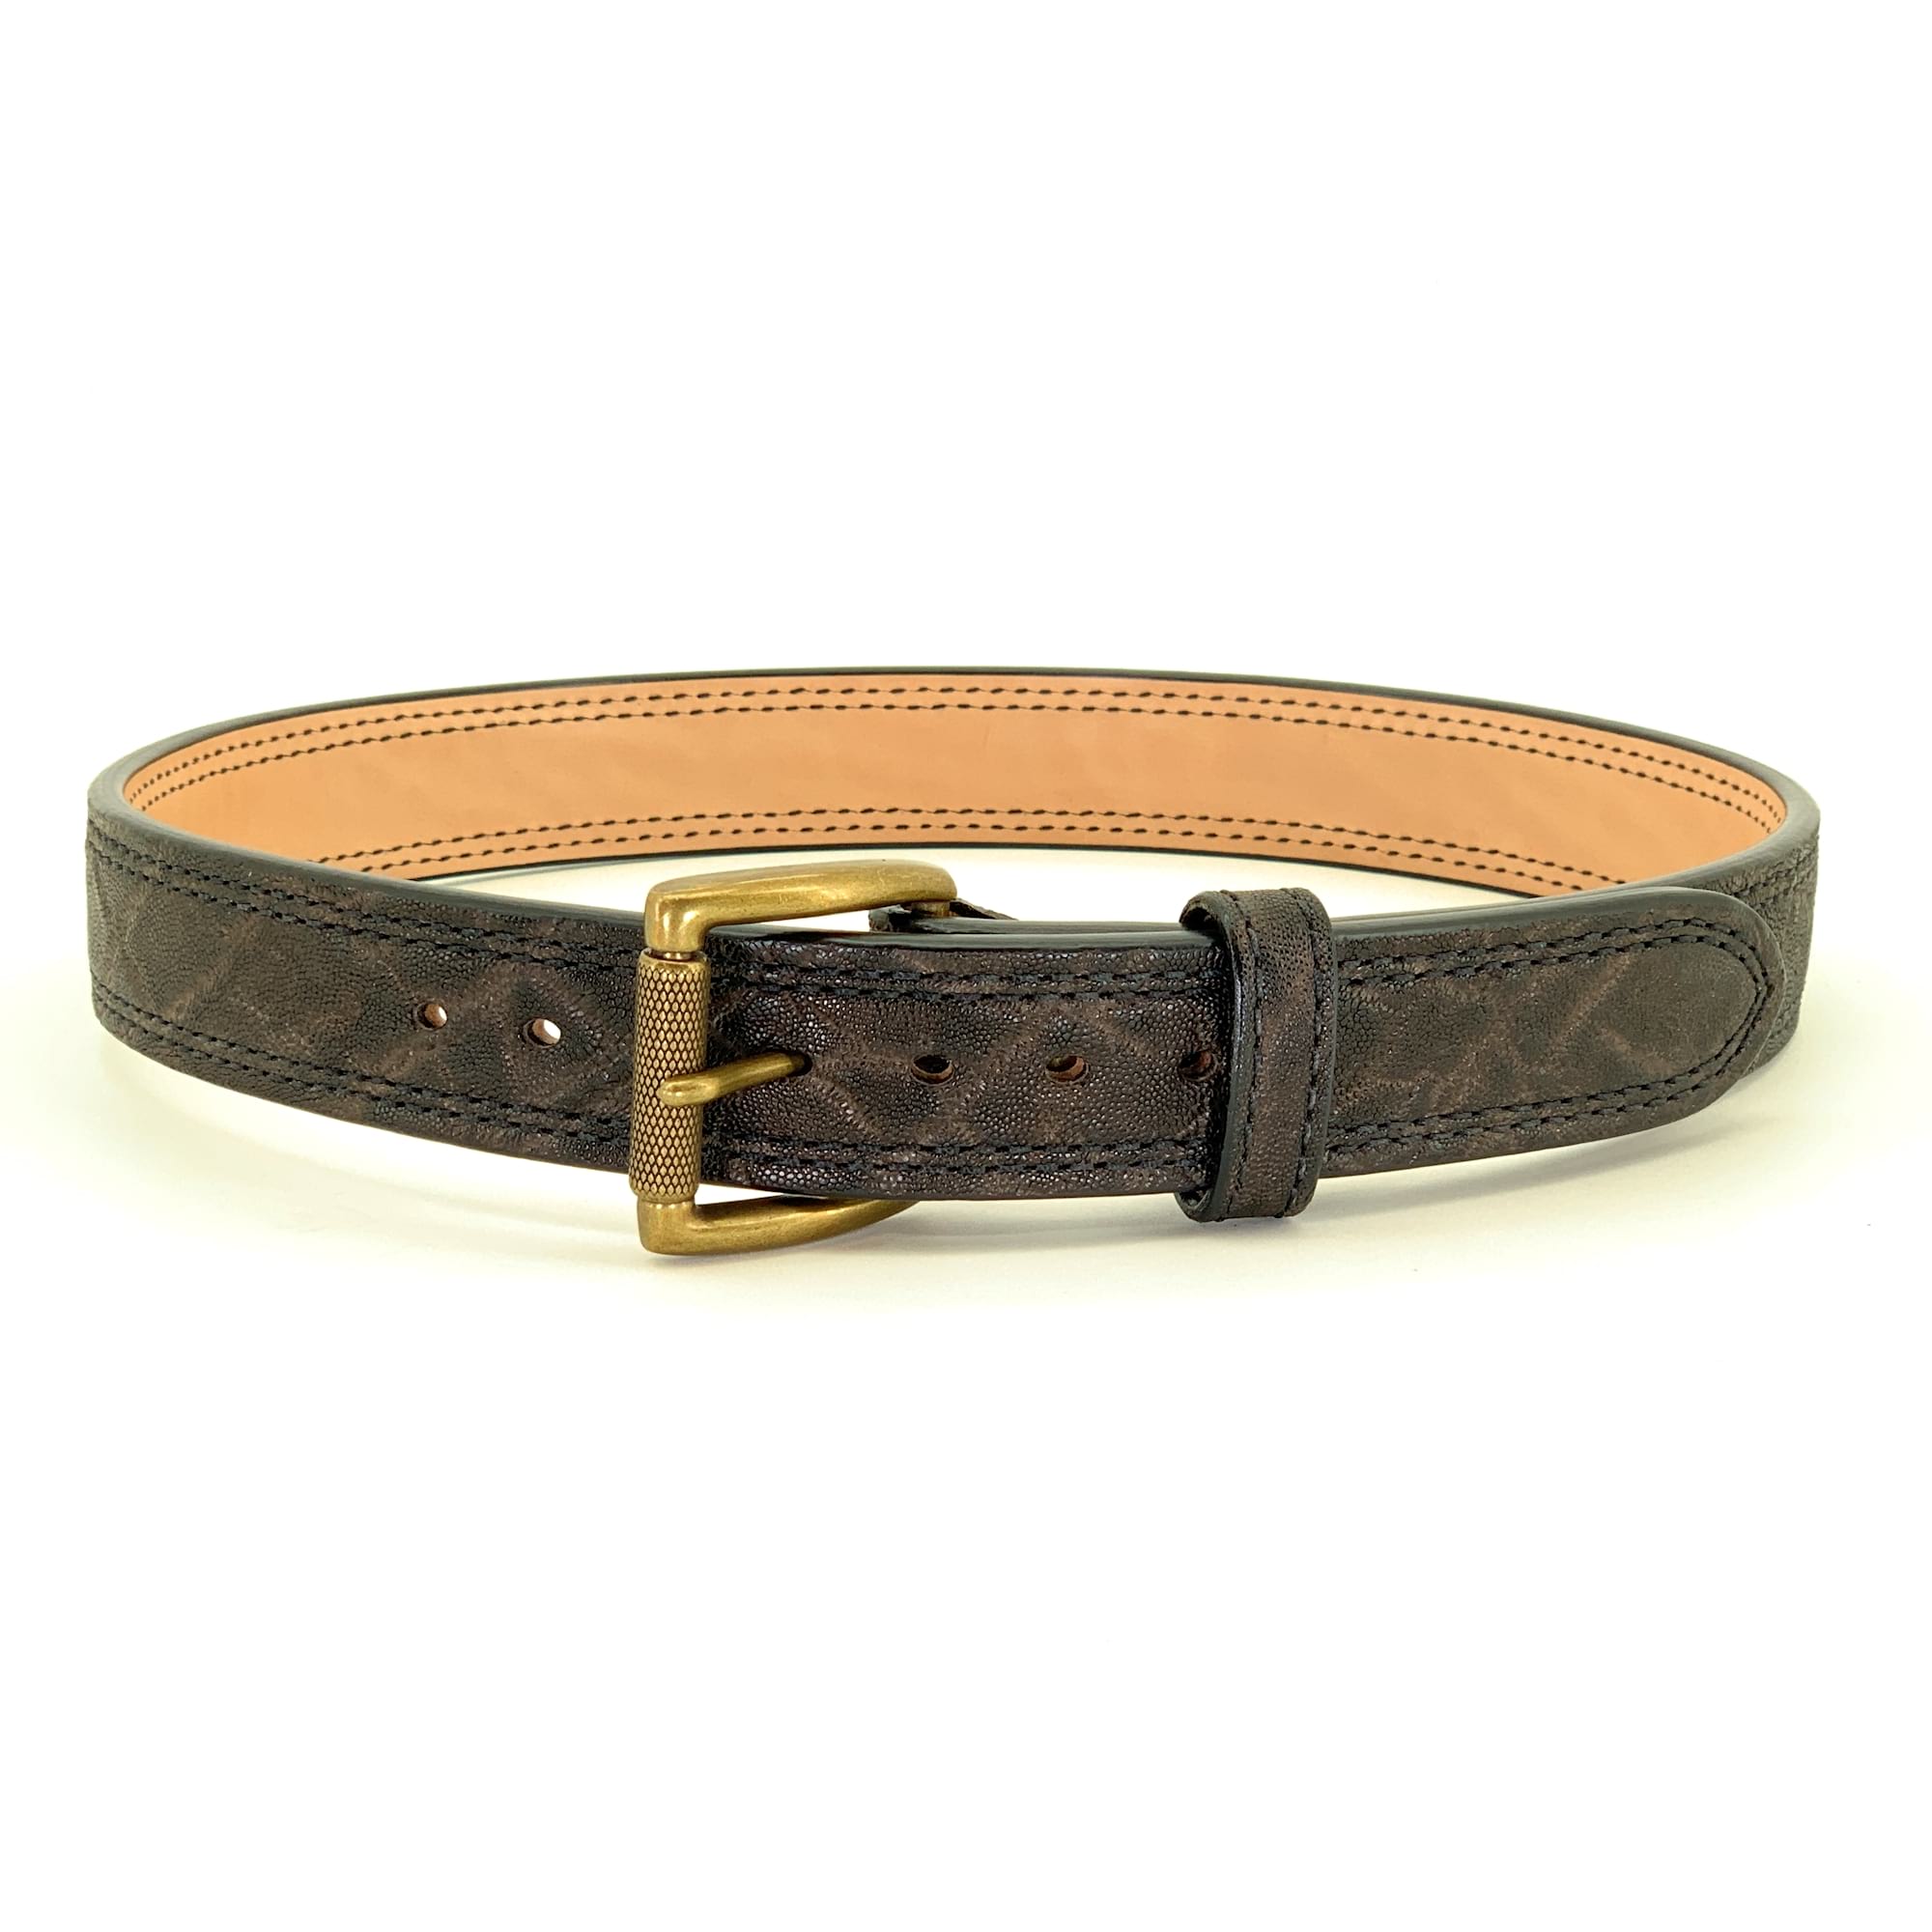 Luxurious Louis Vuitton Genuine Leather Golden buckles Chocolate